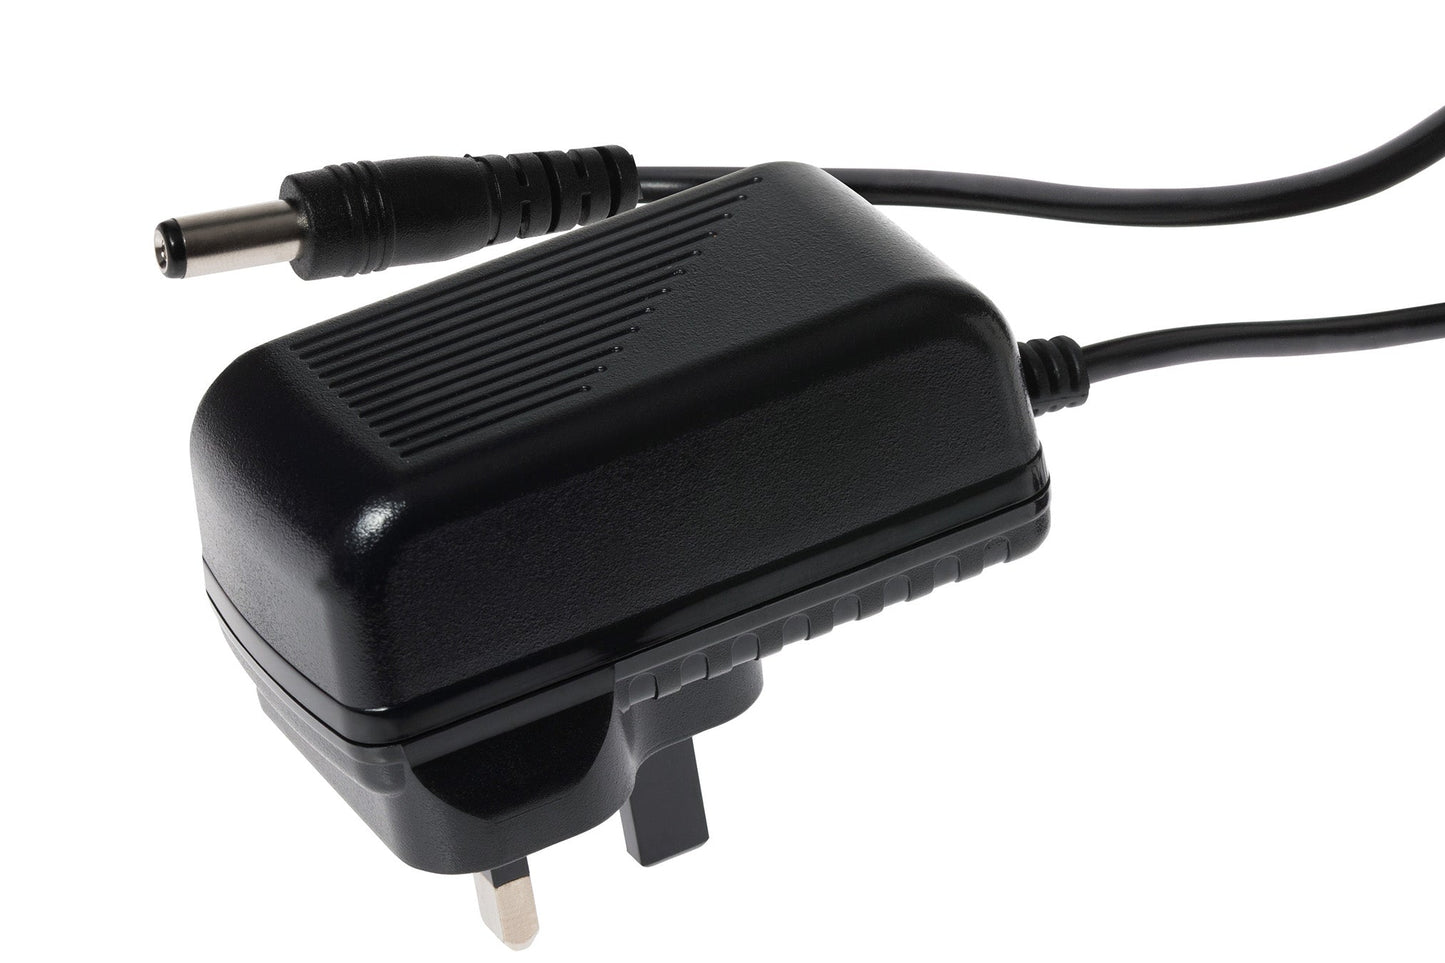 MPS Maplin UK Switching Power Supply 12V DC 2 Amp 24W 2.1mm x 5.5mm x 12mm Plug - 1.5m Cable - maplin.co.uk